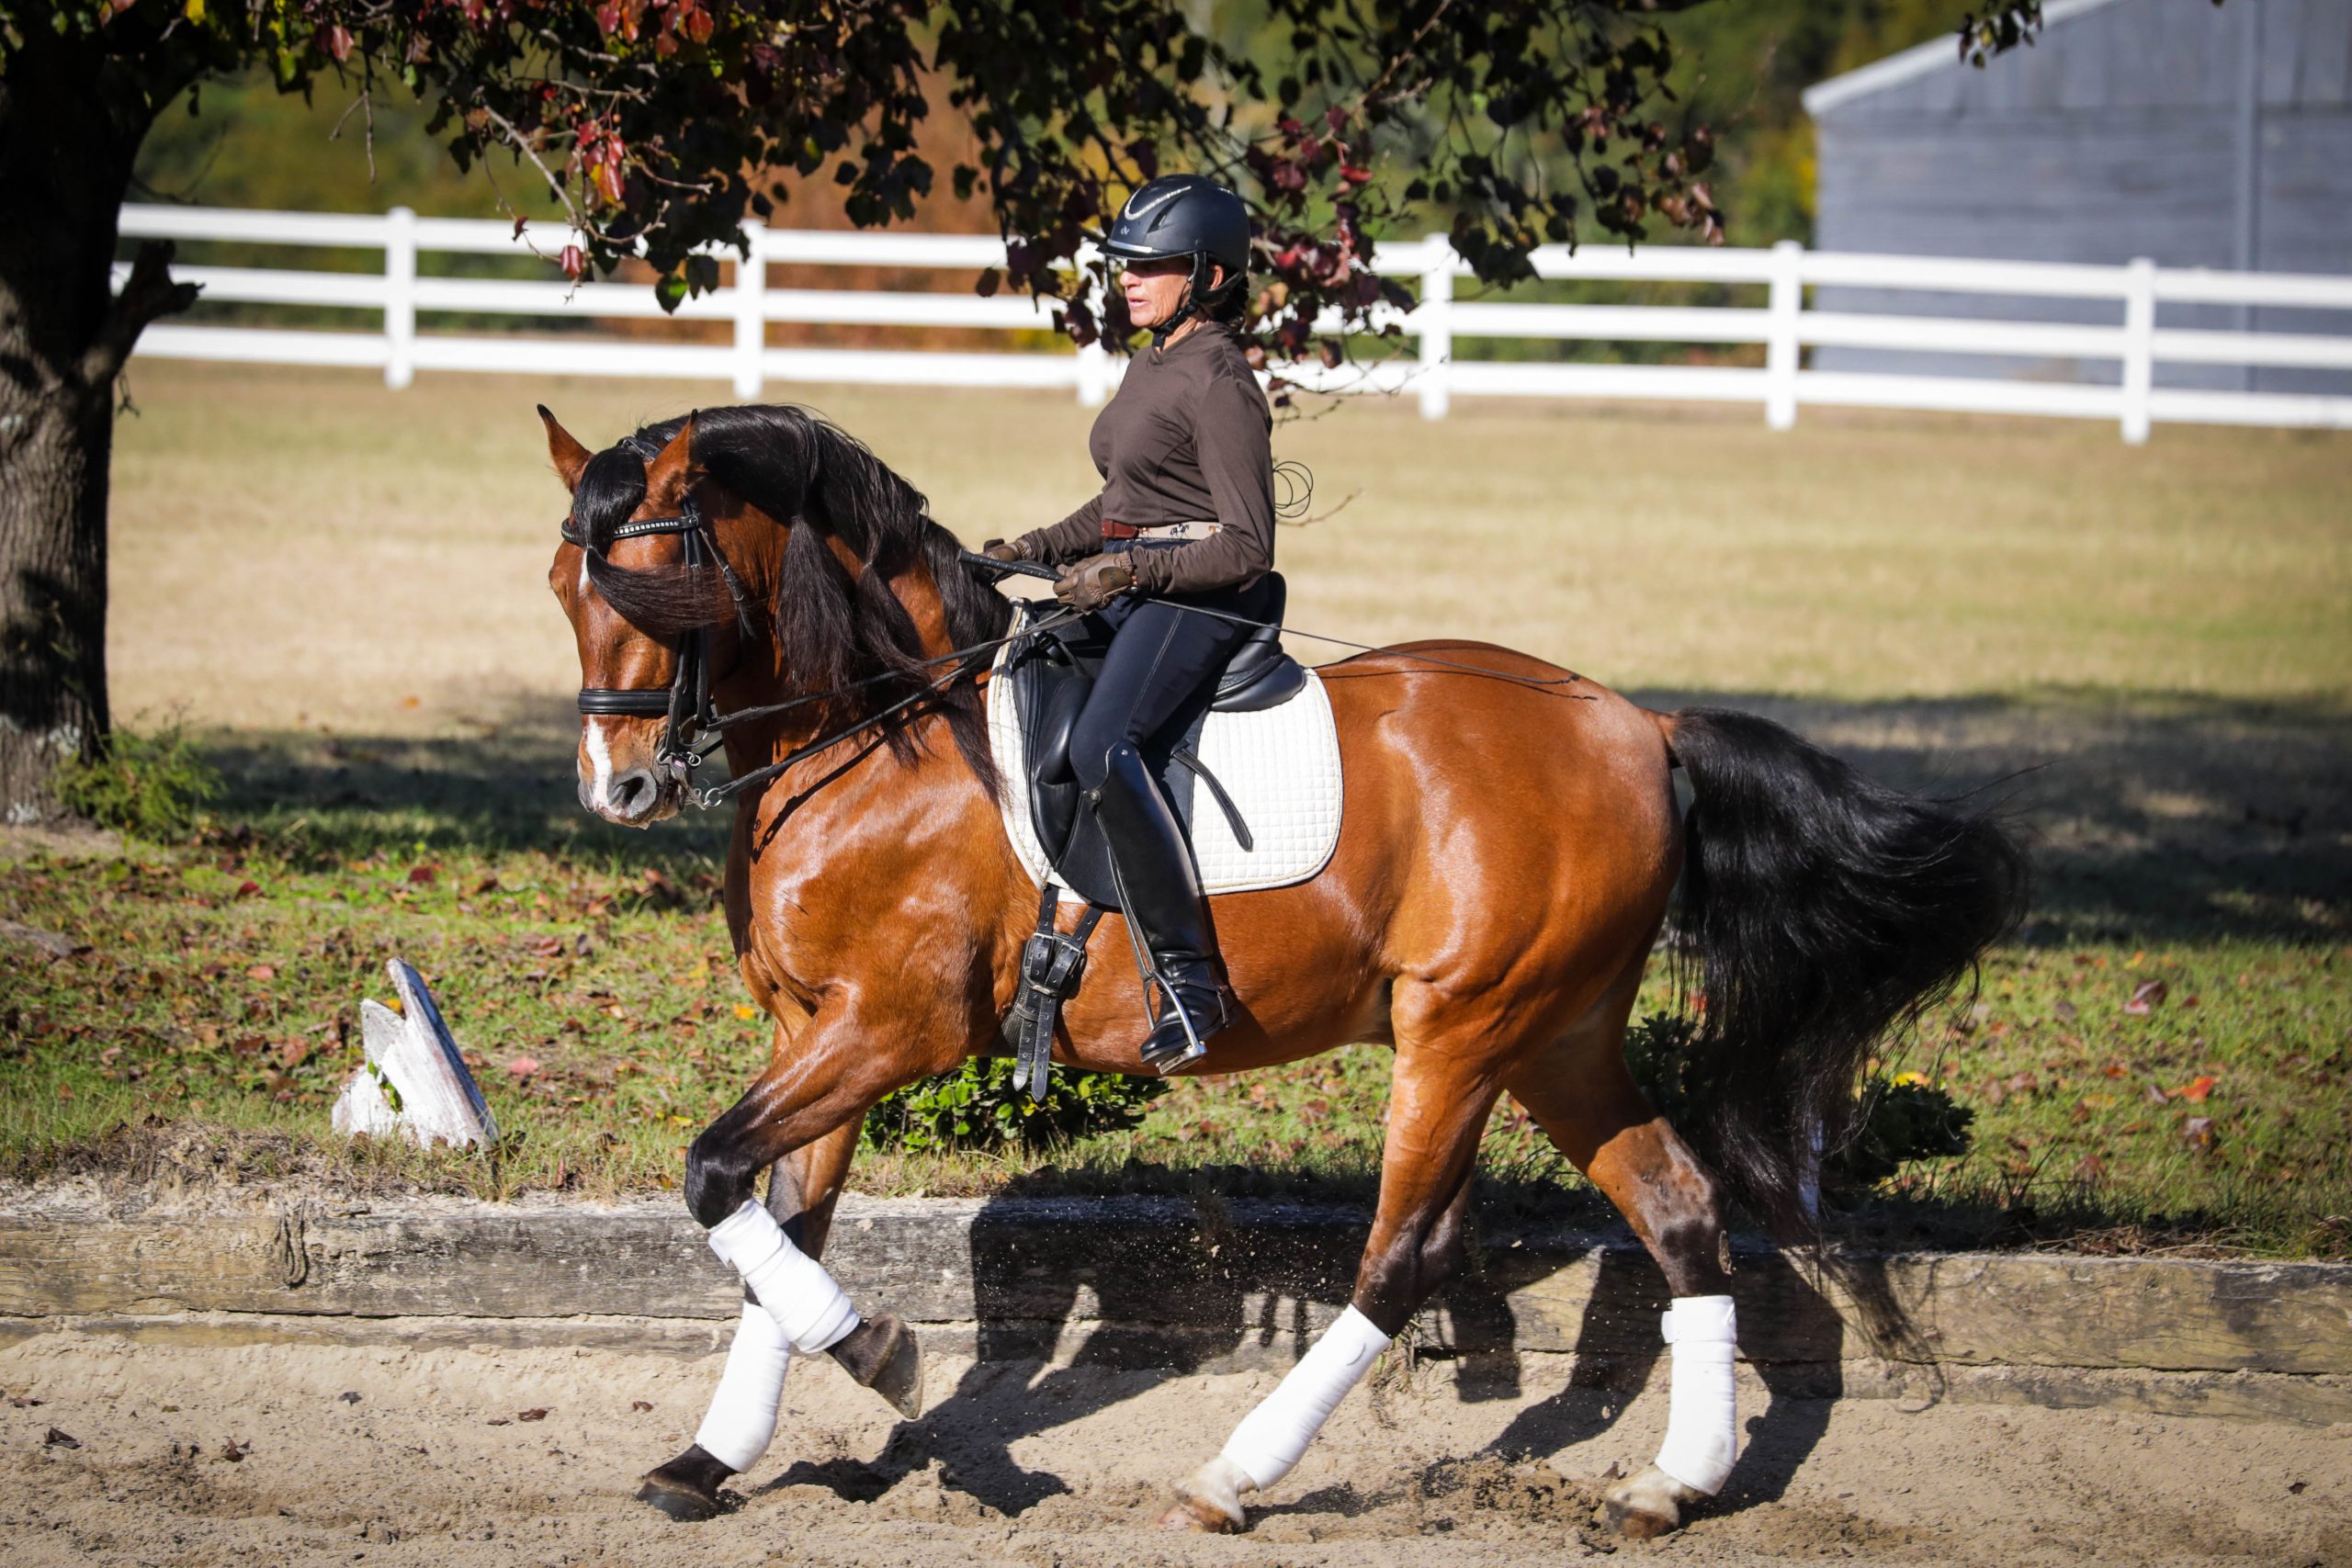 Amy and Deseado practice their dressage moves, making a well-balanced and harmonious picture. “Dressage is a lot like dancing,” says Amy. “It’s kind of amazing to teach horses to do all these beautiful dance movements.” Photography courtesy of Meghan Benge